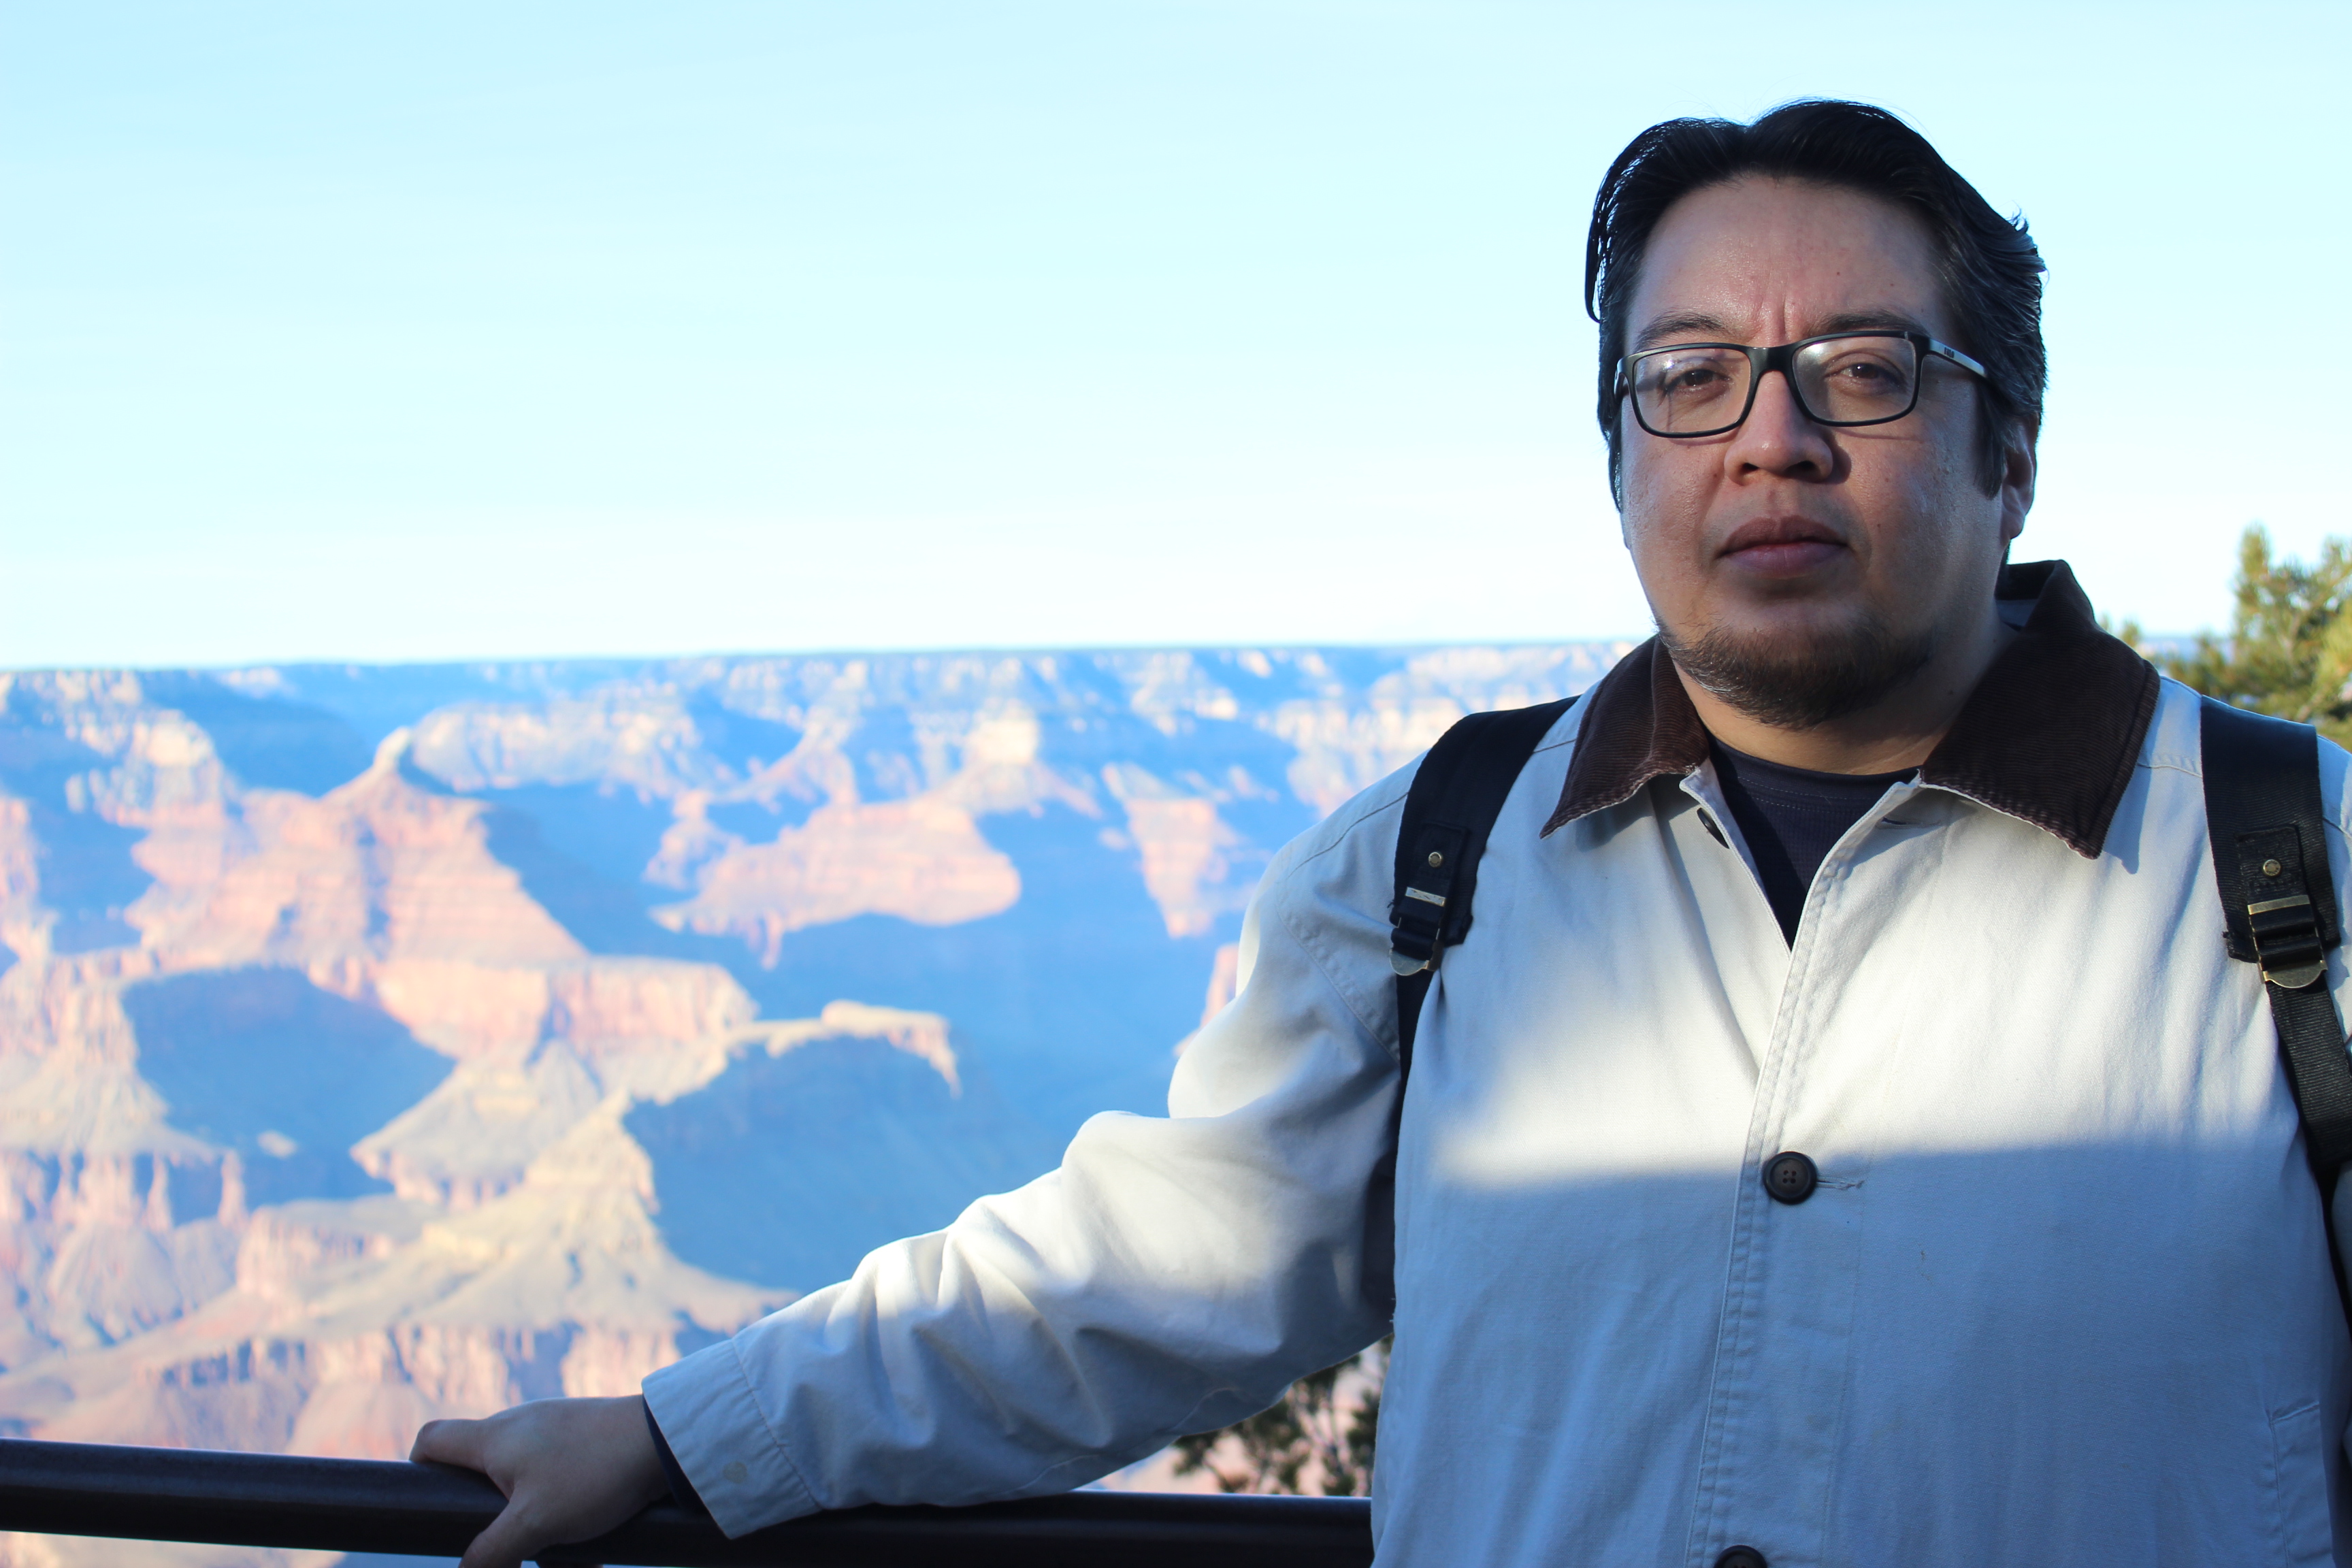 Grand Canyon Chronicles: Learning to Embrace Life, More